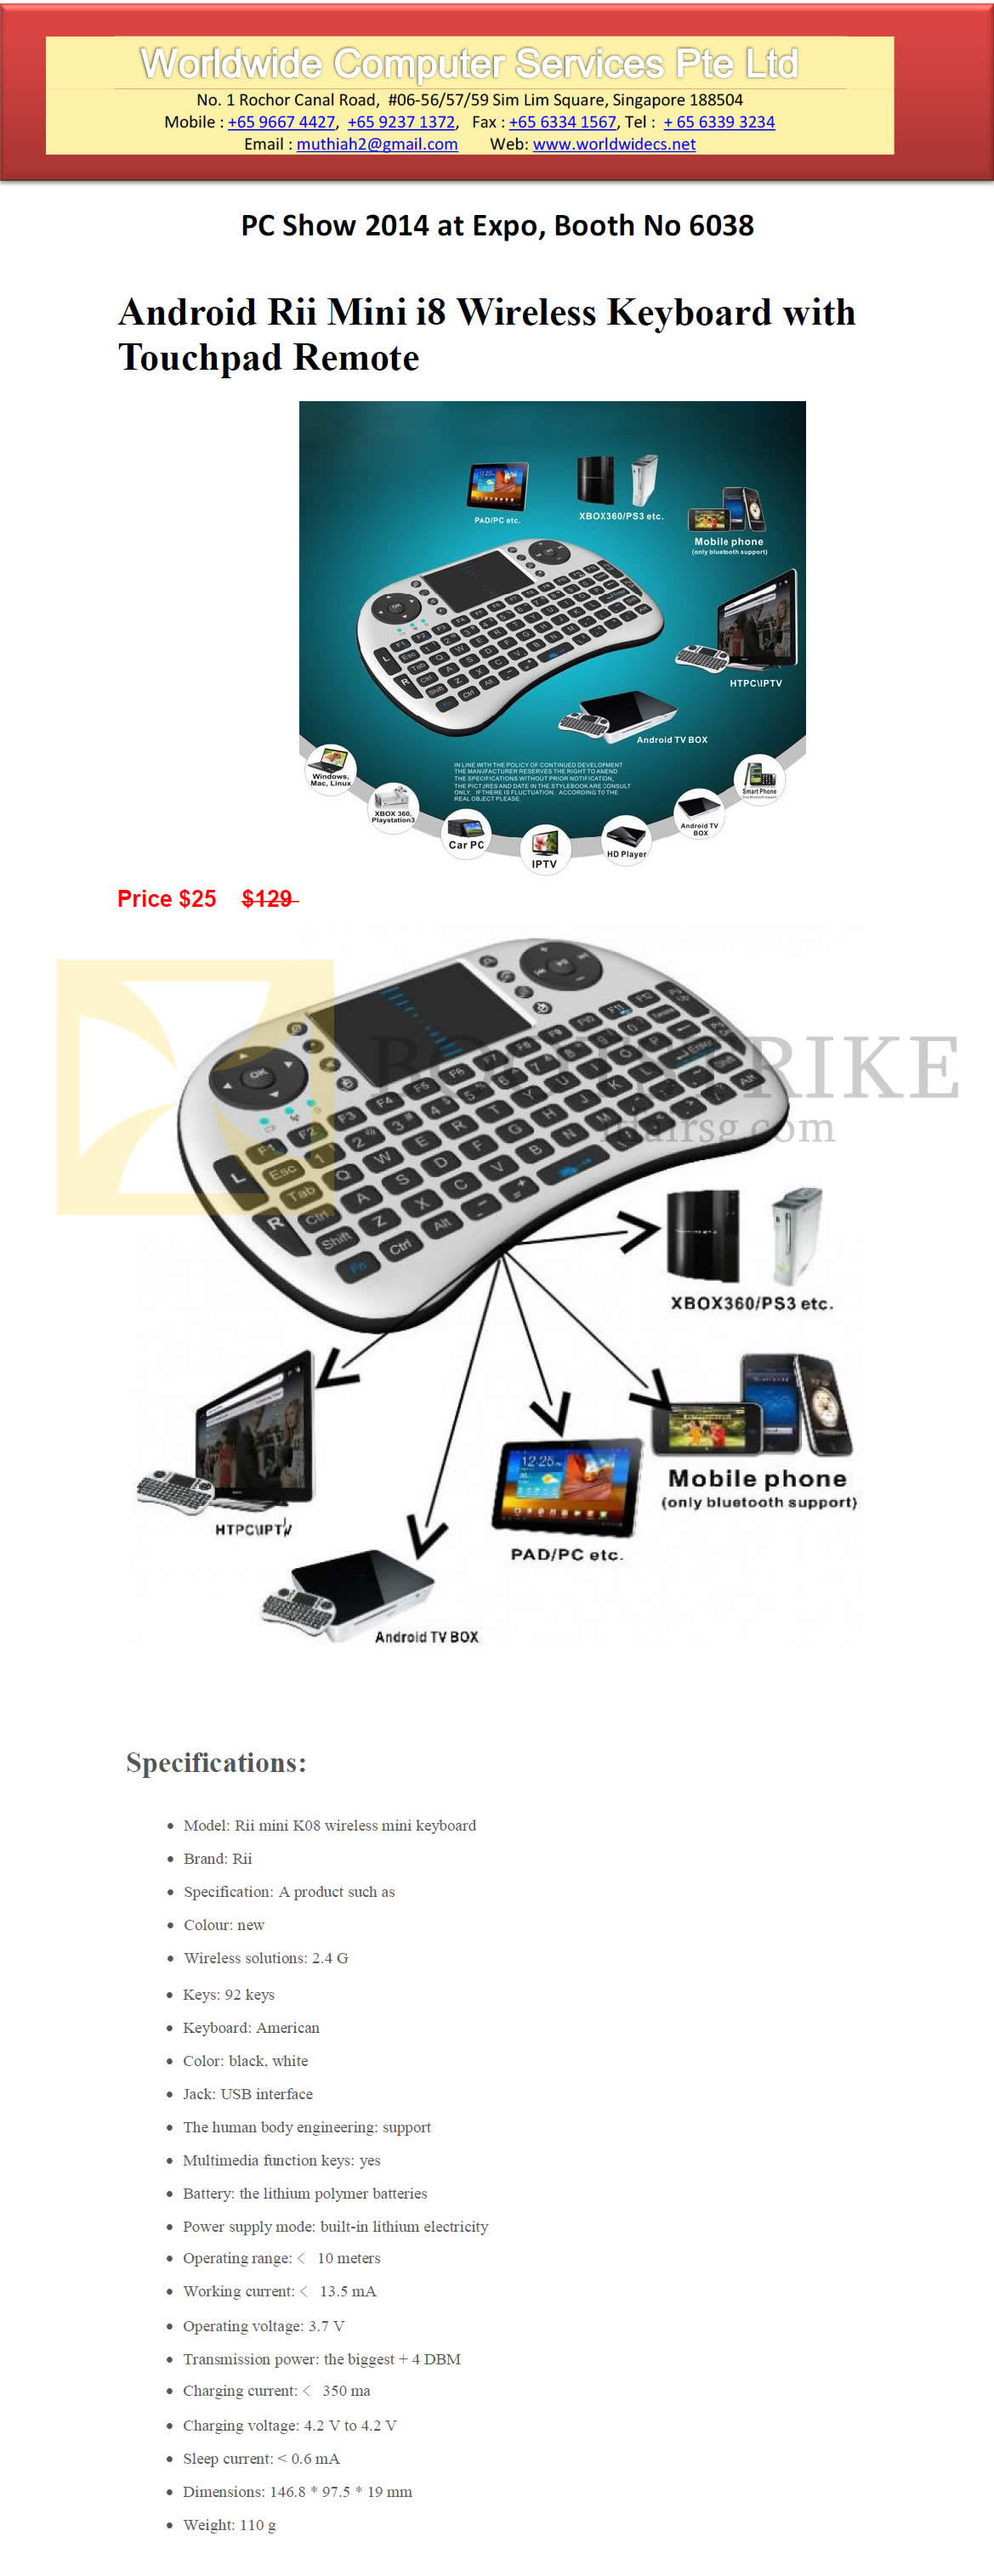 PC SHOW 2014 price list image brochure of Worldwide Computer Services Android Rii Mini I8 Wireless Keyboard